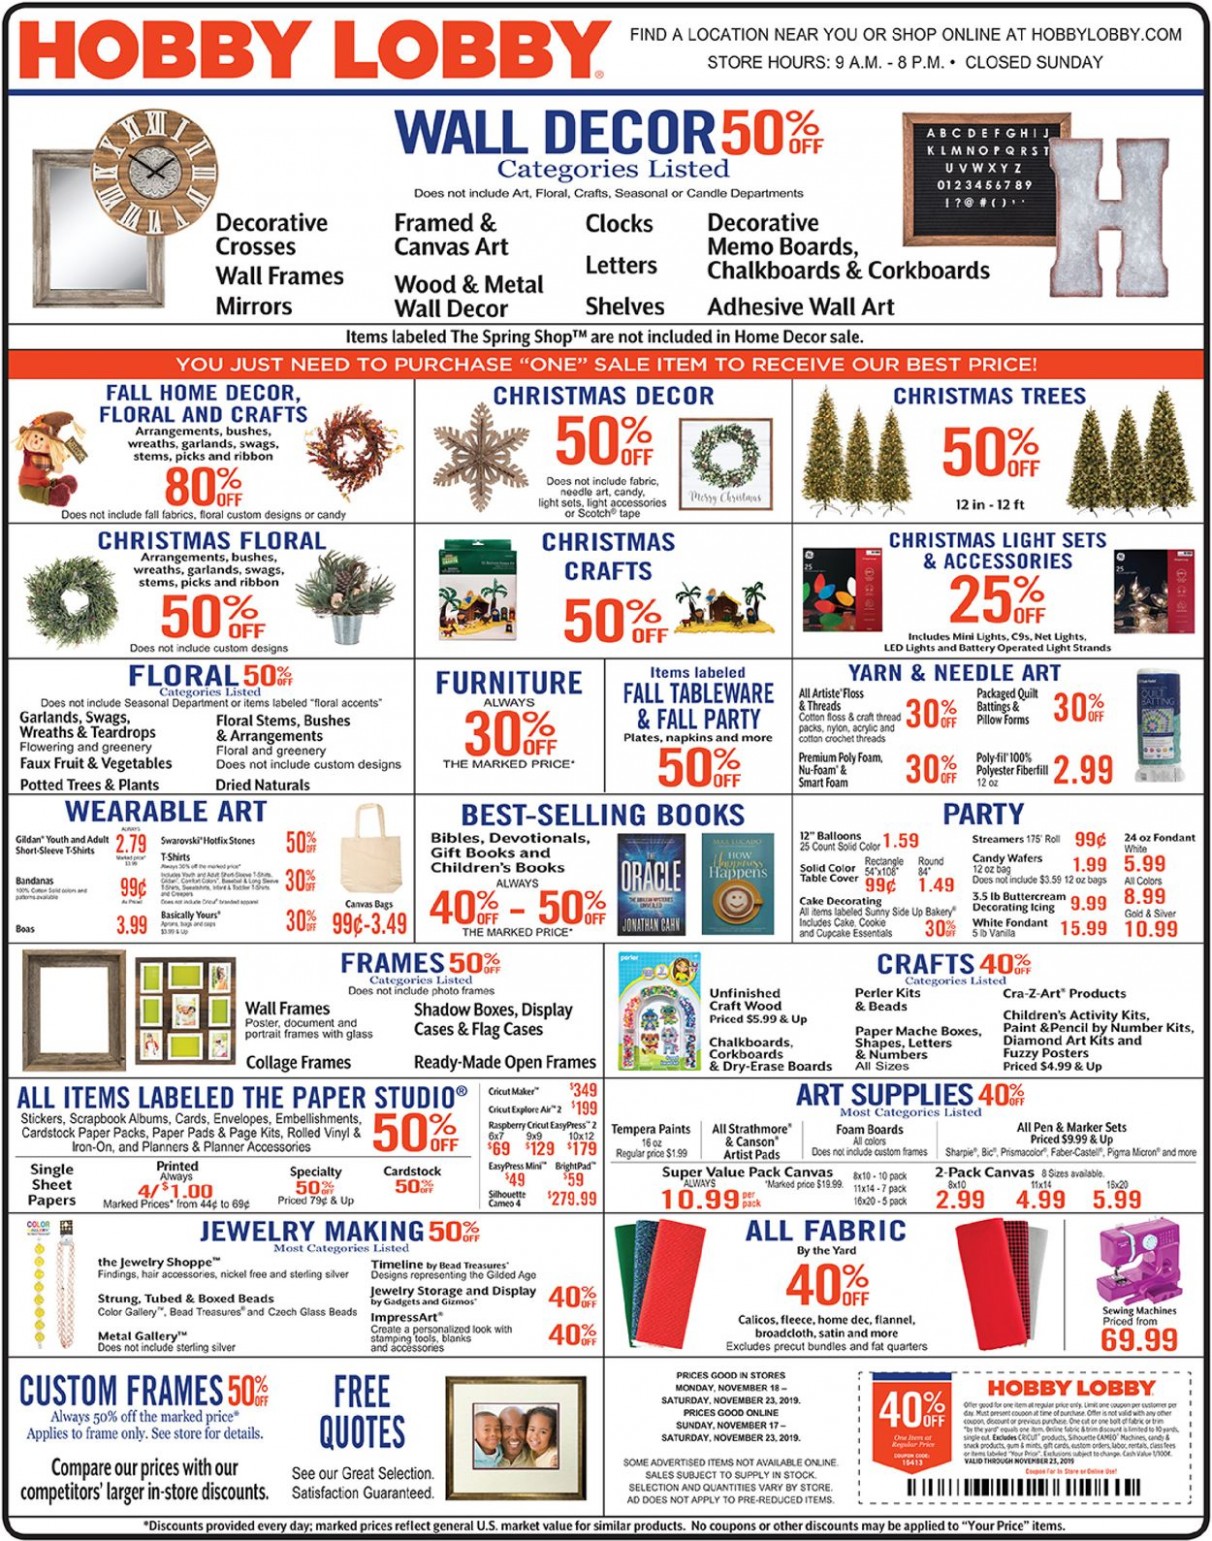 Hobby Lobby Current Weekly Ad 8/8 8/8/8 Frequent Ads